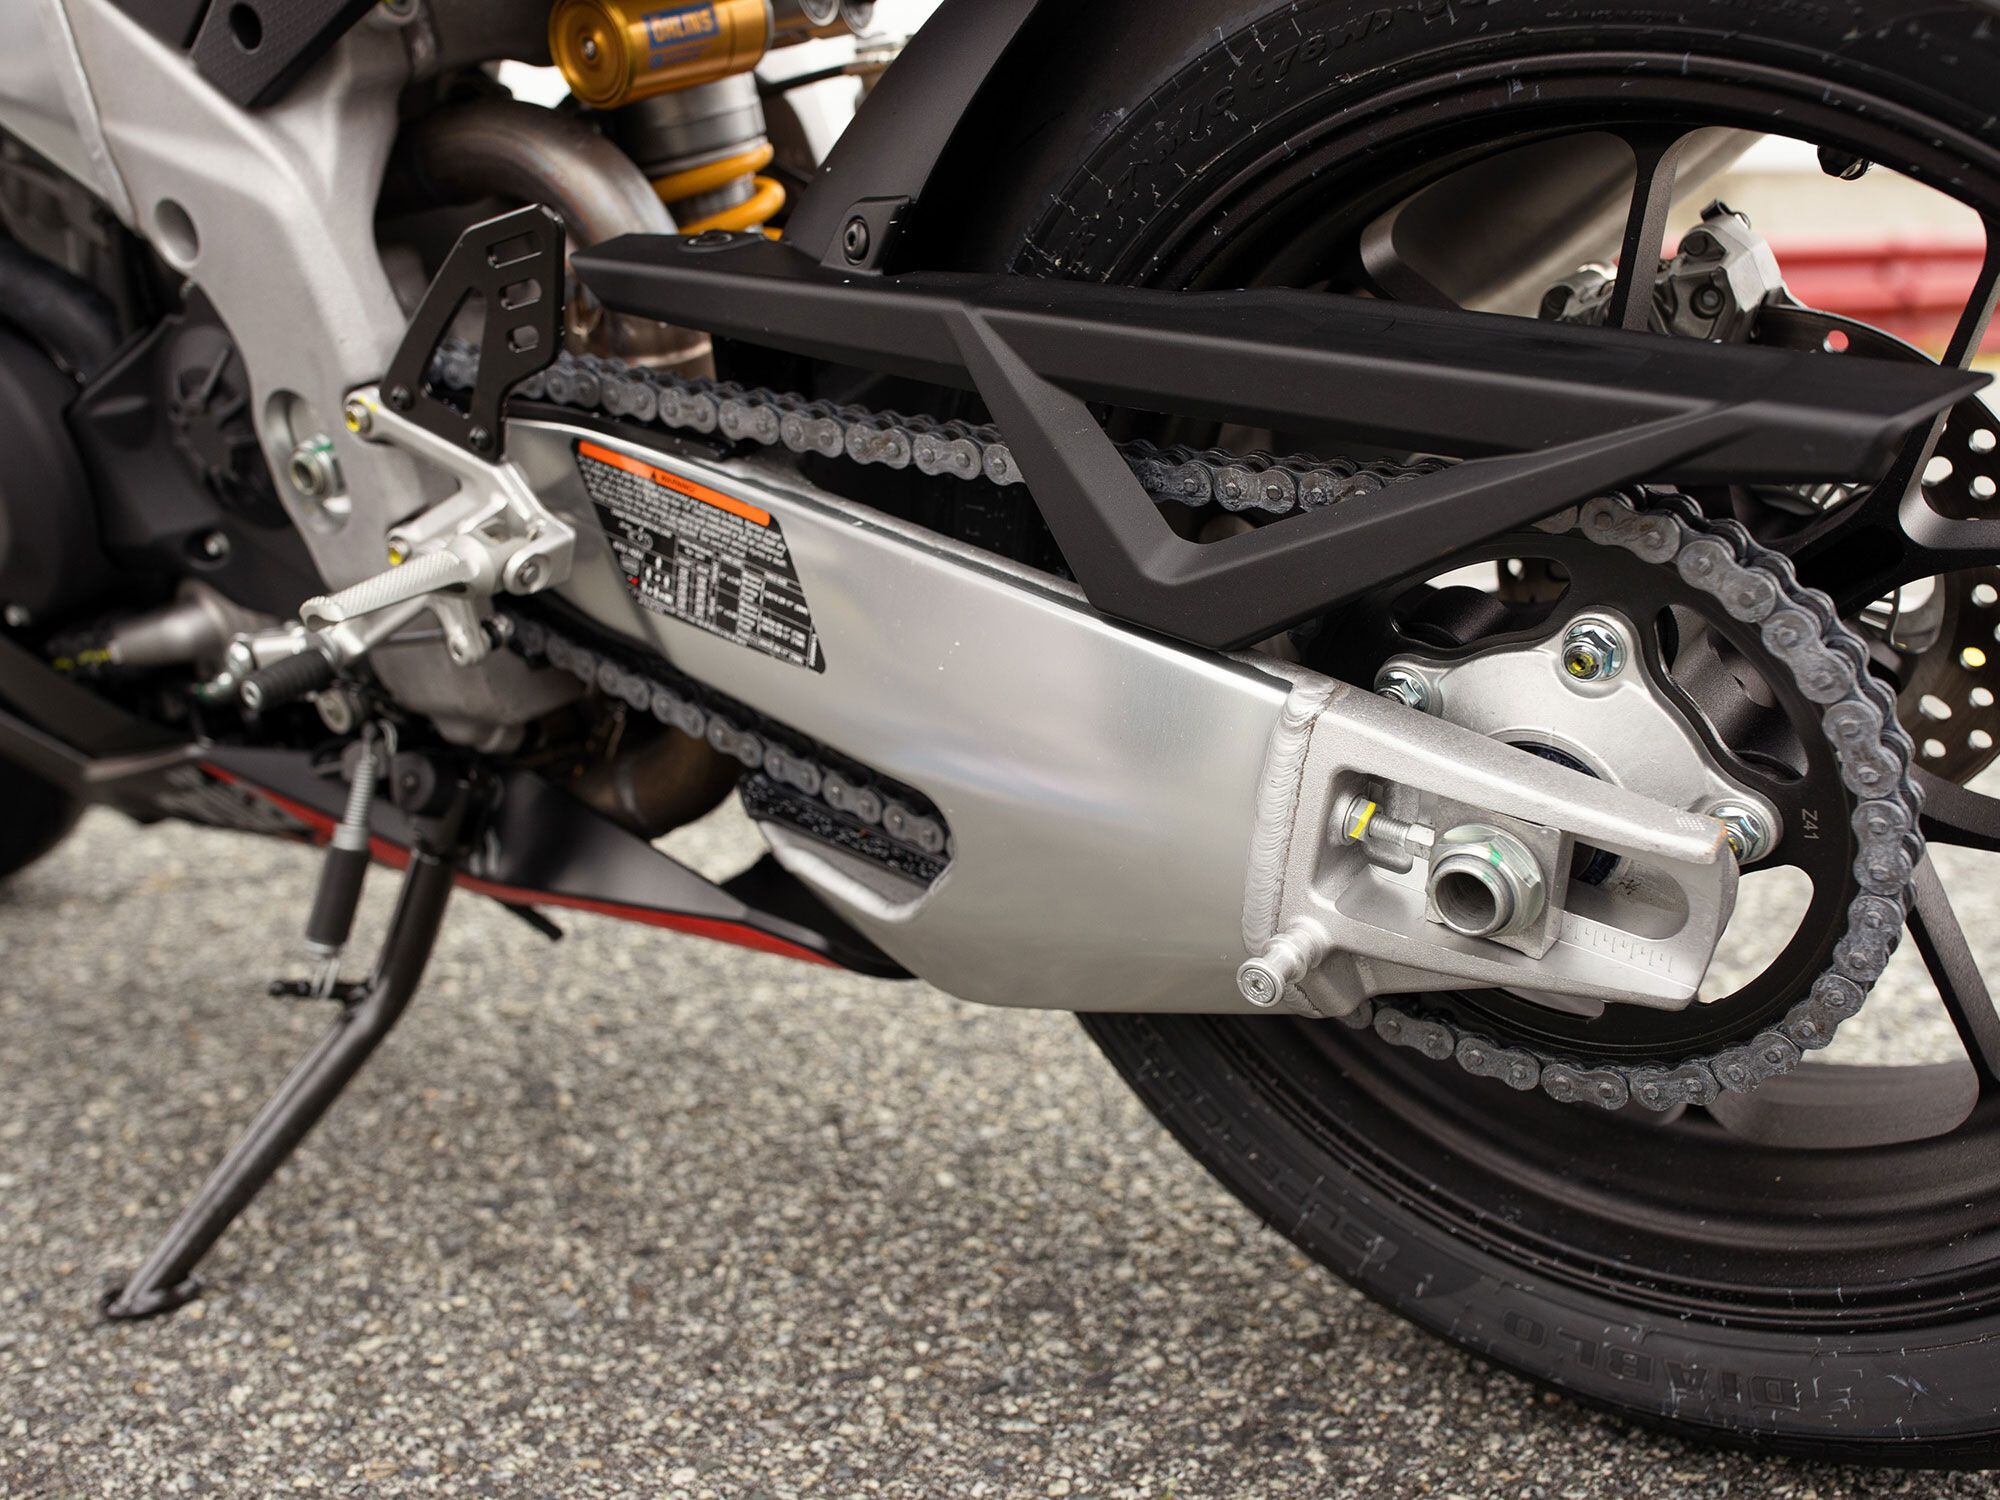 The RSV4’s and RSV4 Factory’s updated swingarm is a big deal. It boosts traction and nets improved vehicle acceleration.